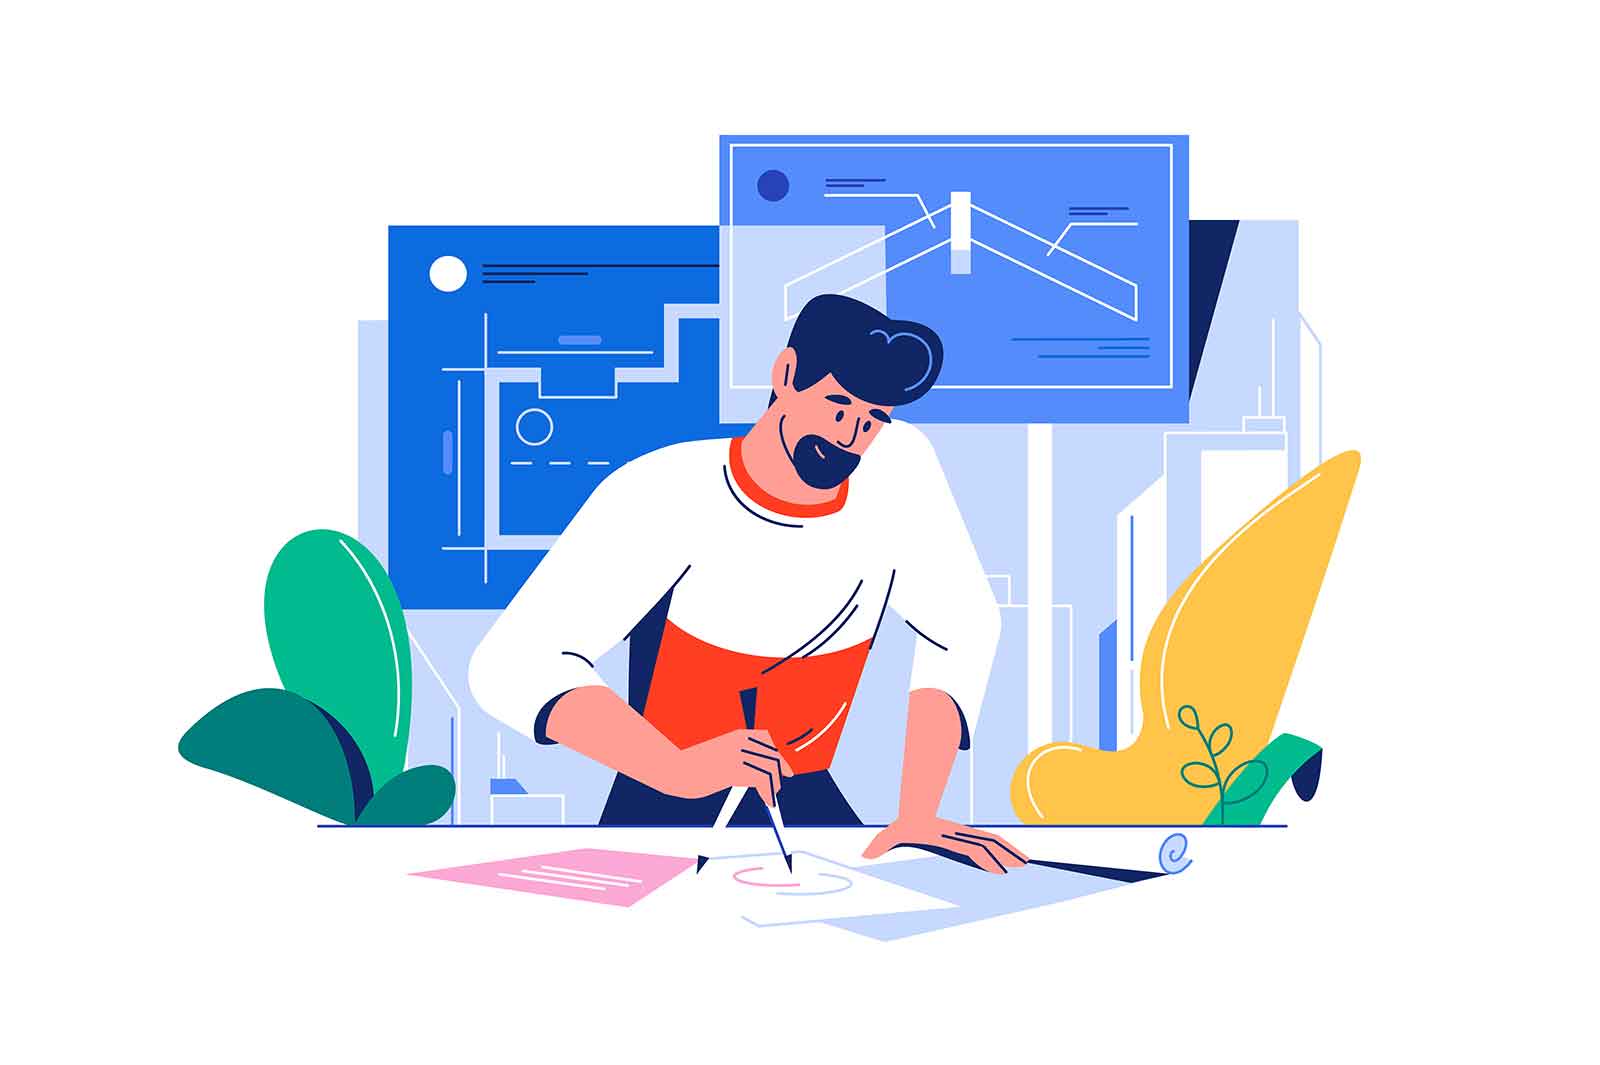 Architect designs building plan, vector illustration. Man architect working in office with blueprints on table and behind him.